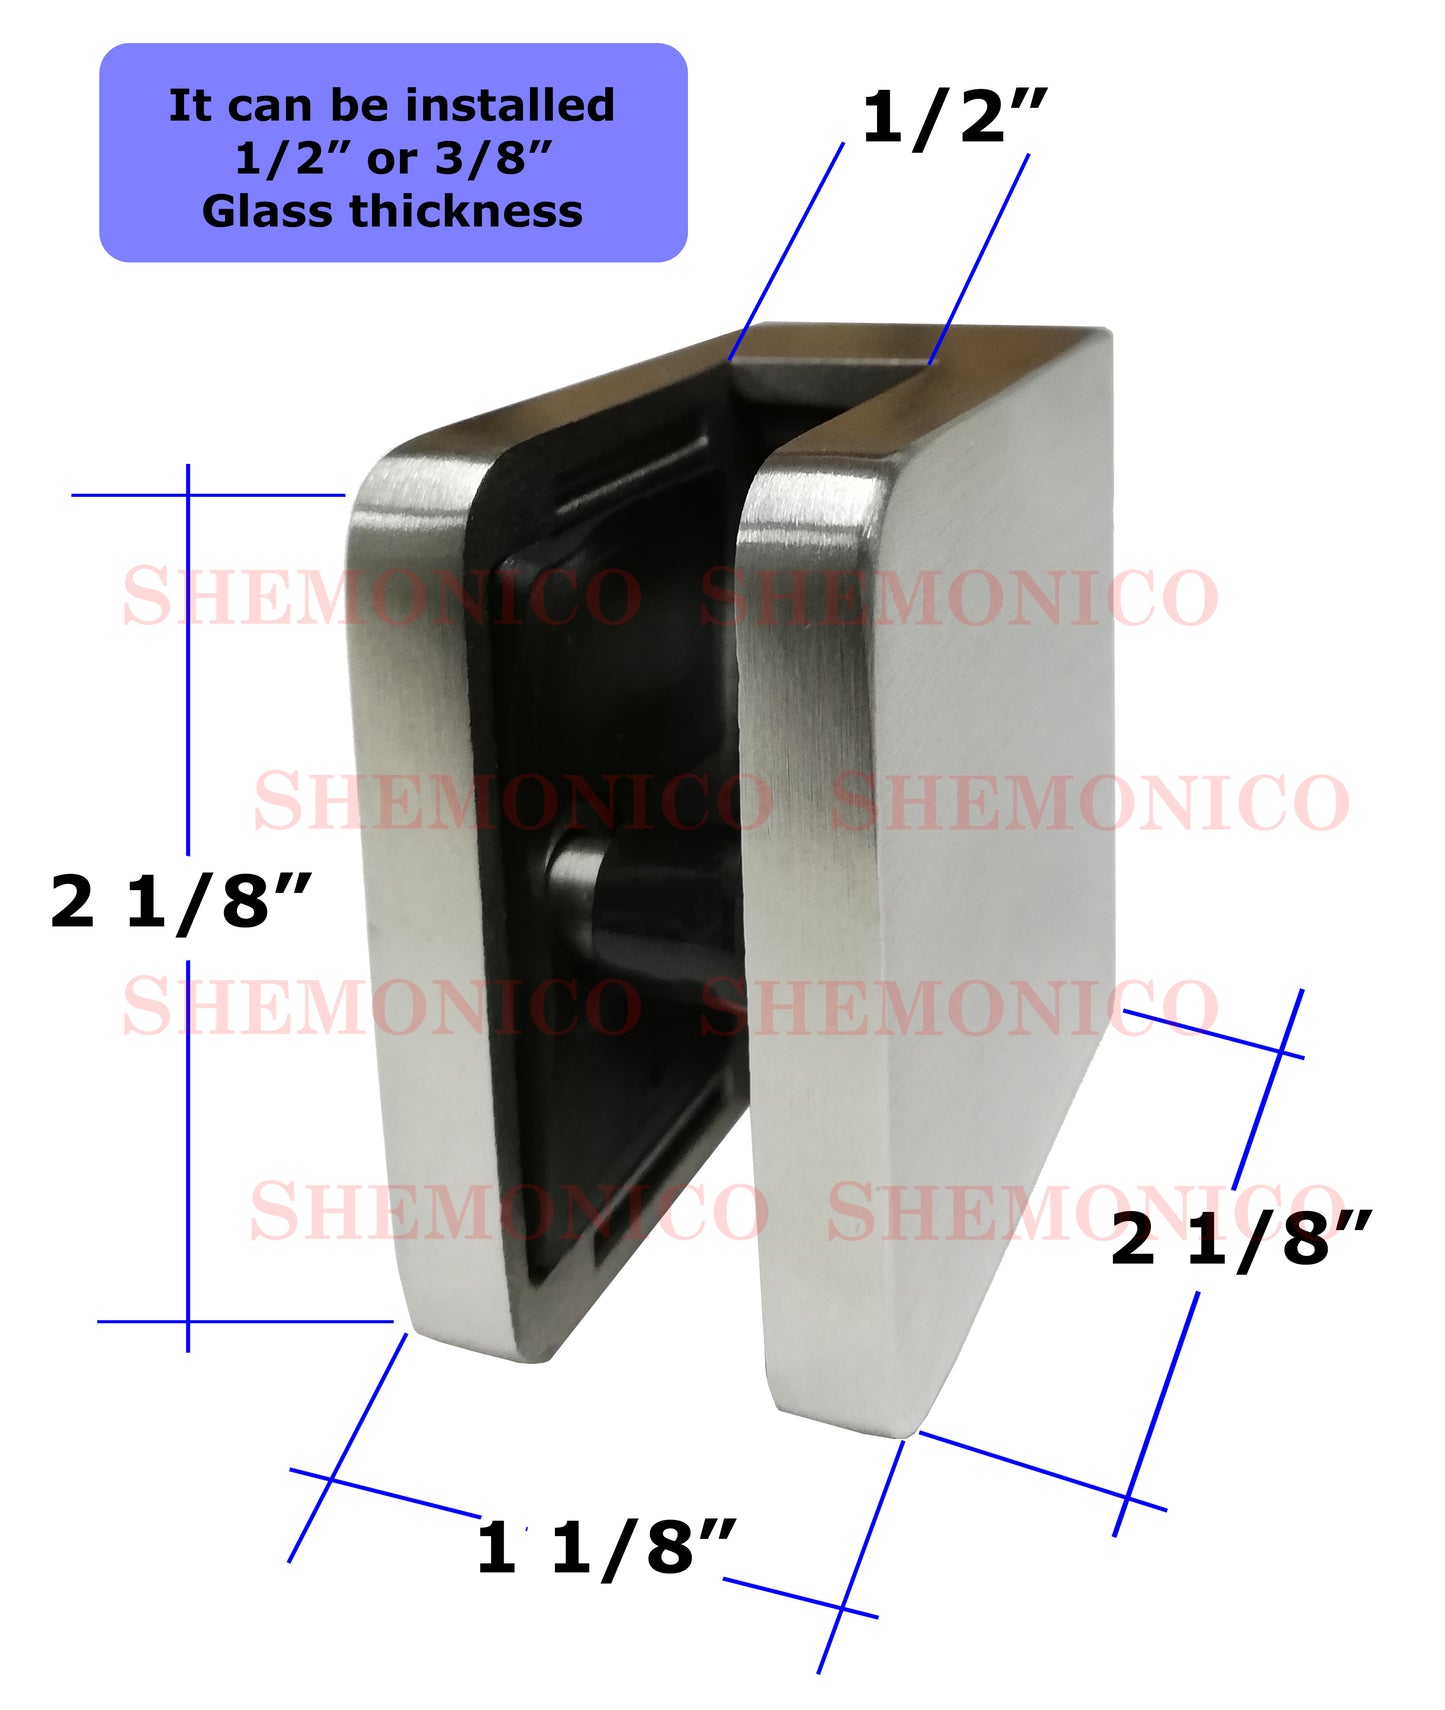 Stainless Steel 316 Grade Square Flat Post Glass Clamp 2 1/8" x 2 1/8" for 3/8" or 1/2" Glass Satin Finish (G1090) - SHEMONICO